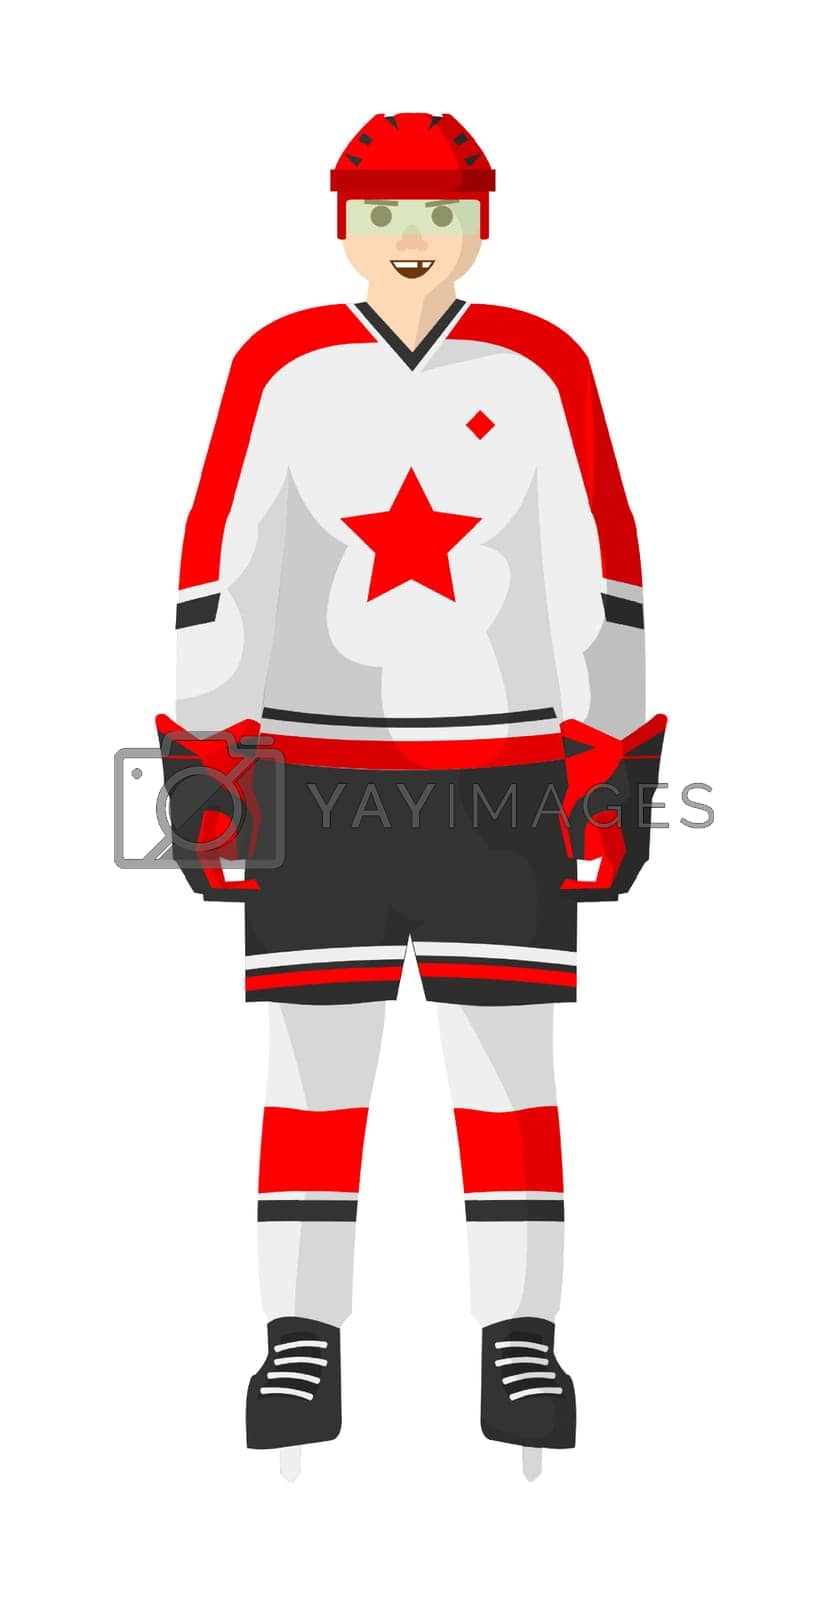 Royalty free image of Hockey player in uniform male character in uniform by Sonulkaster